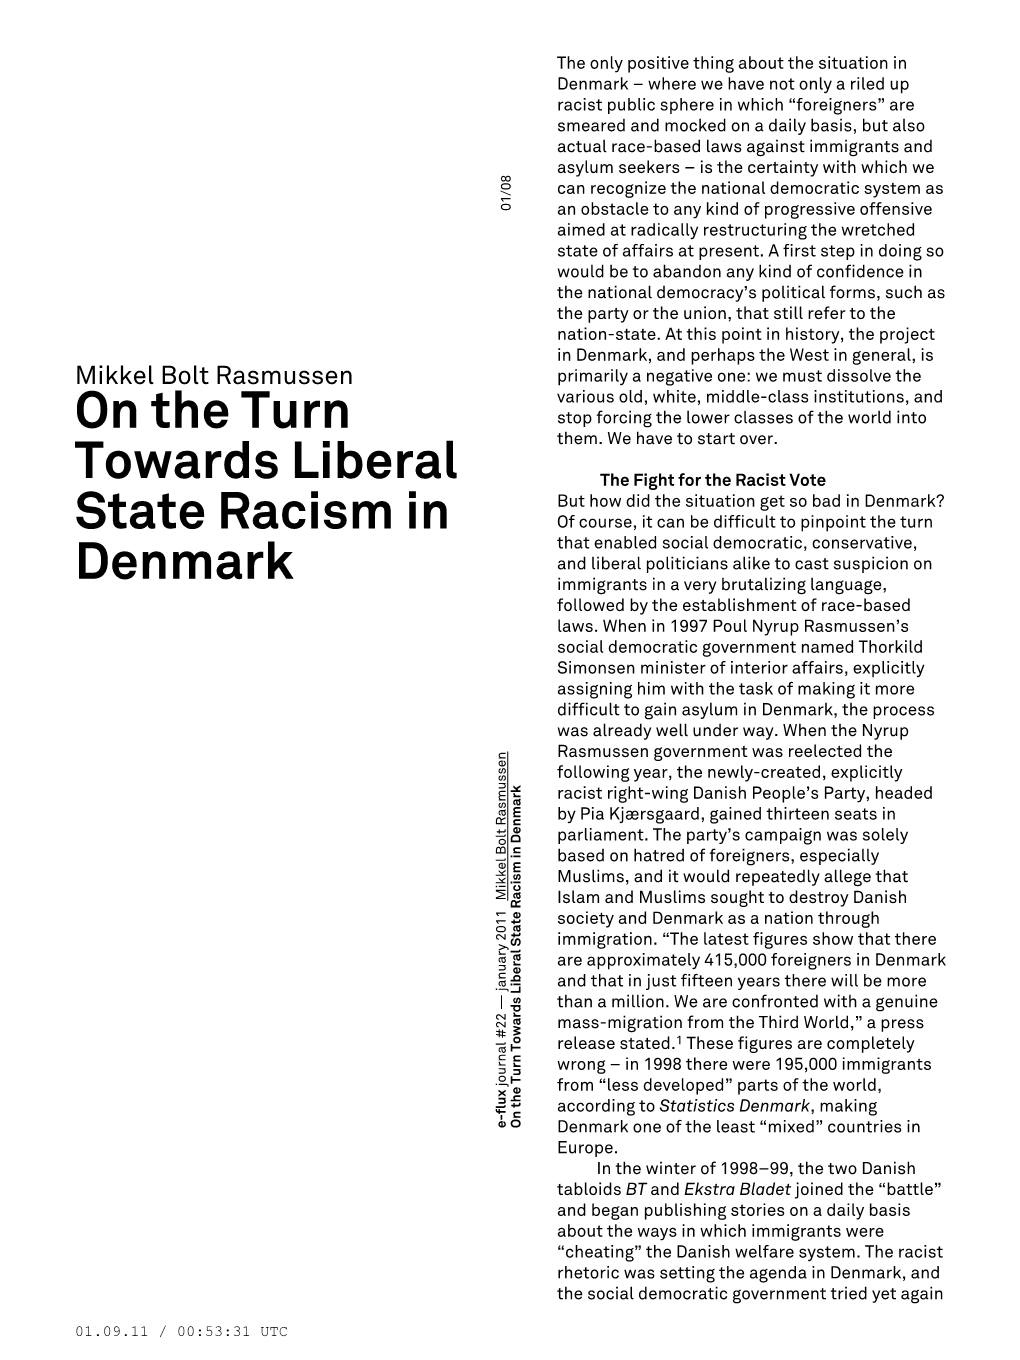 On the Turn Towards Liberal State Racism in Denmark